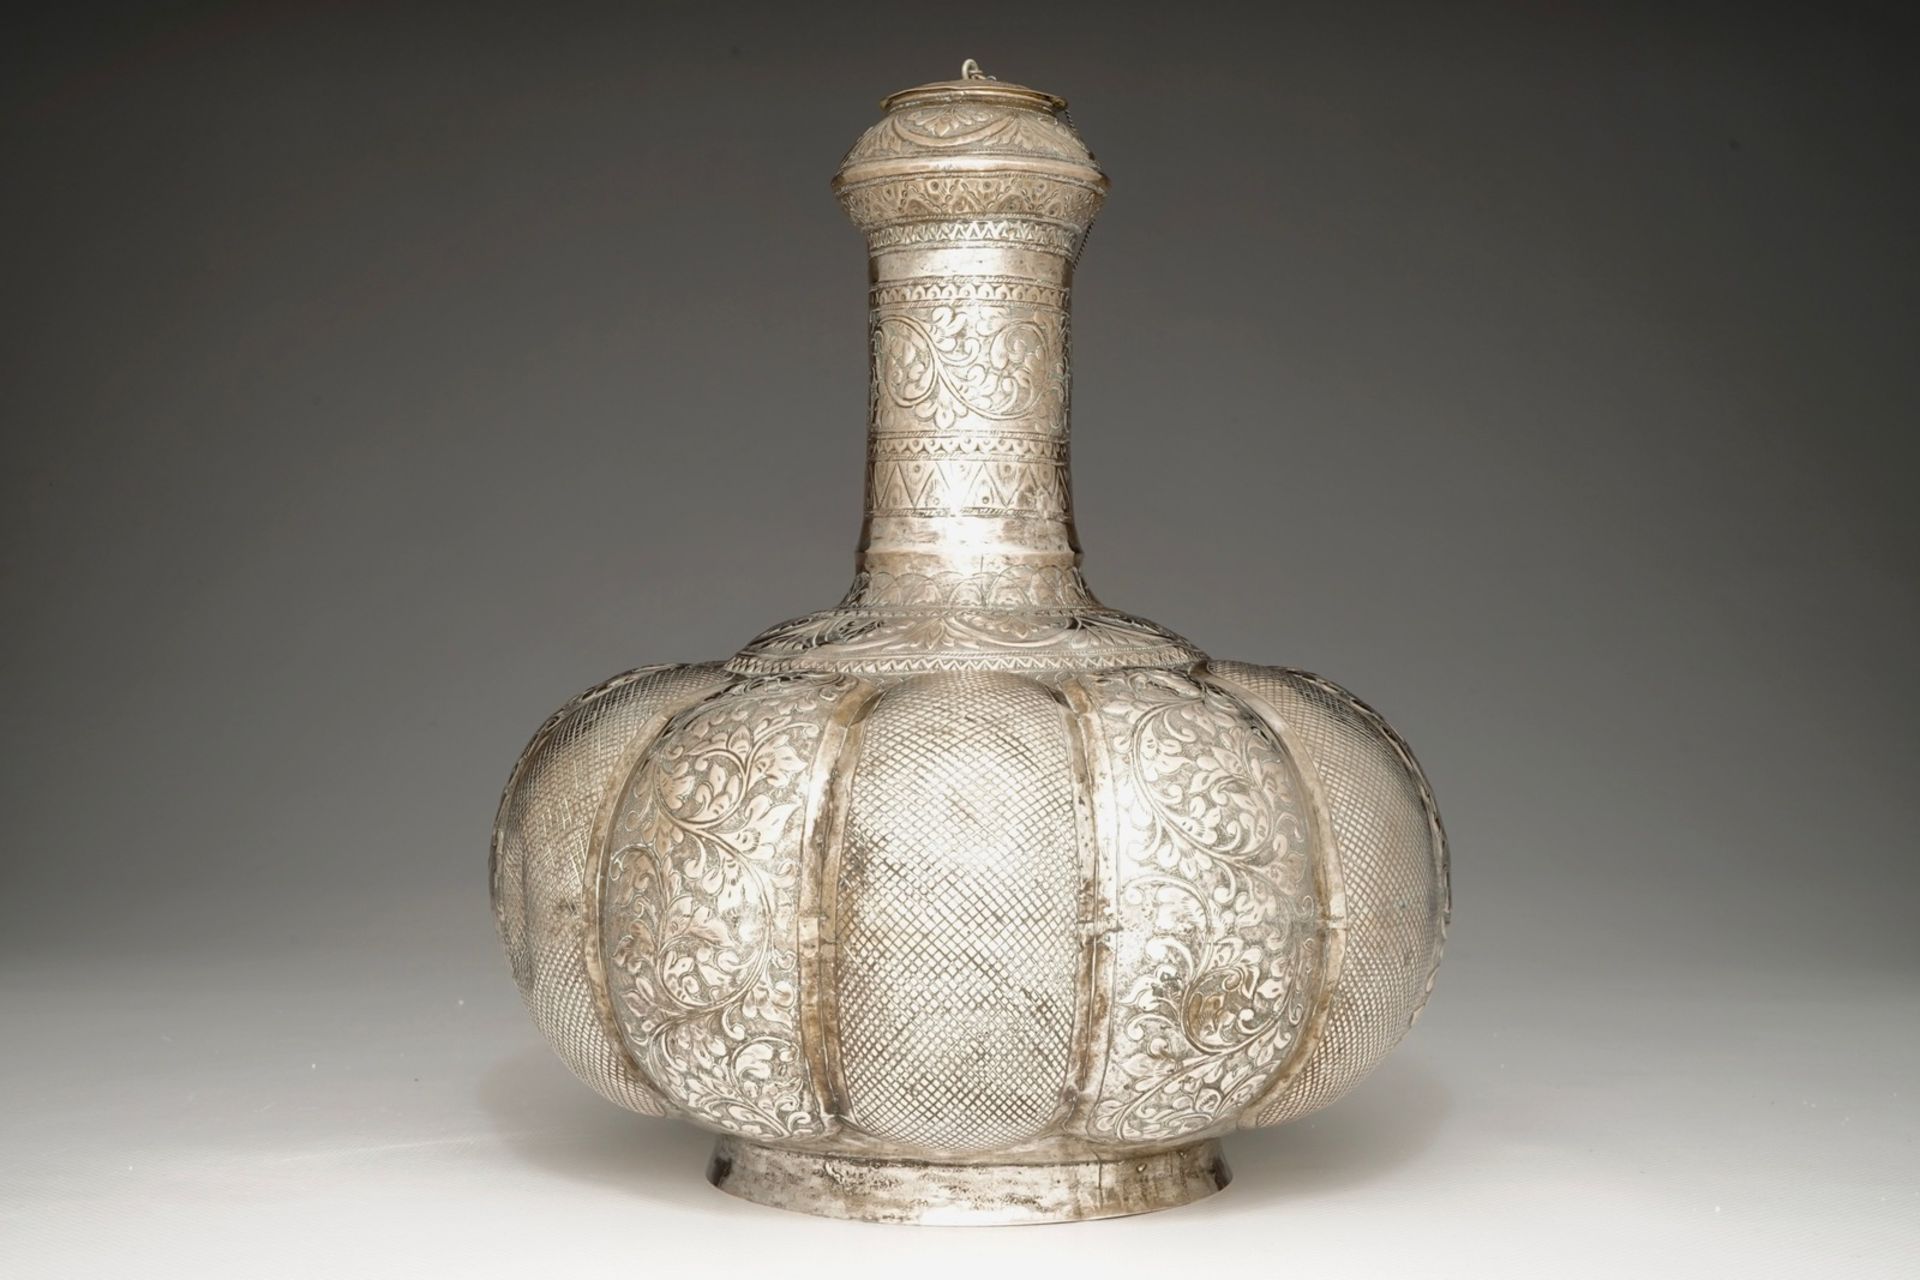 A silvered brass kendi, Mughal, India, 18/19th C. H.: 27 cm - L.: 24 cm We have more lots - Image 4 of 7